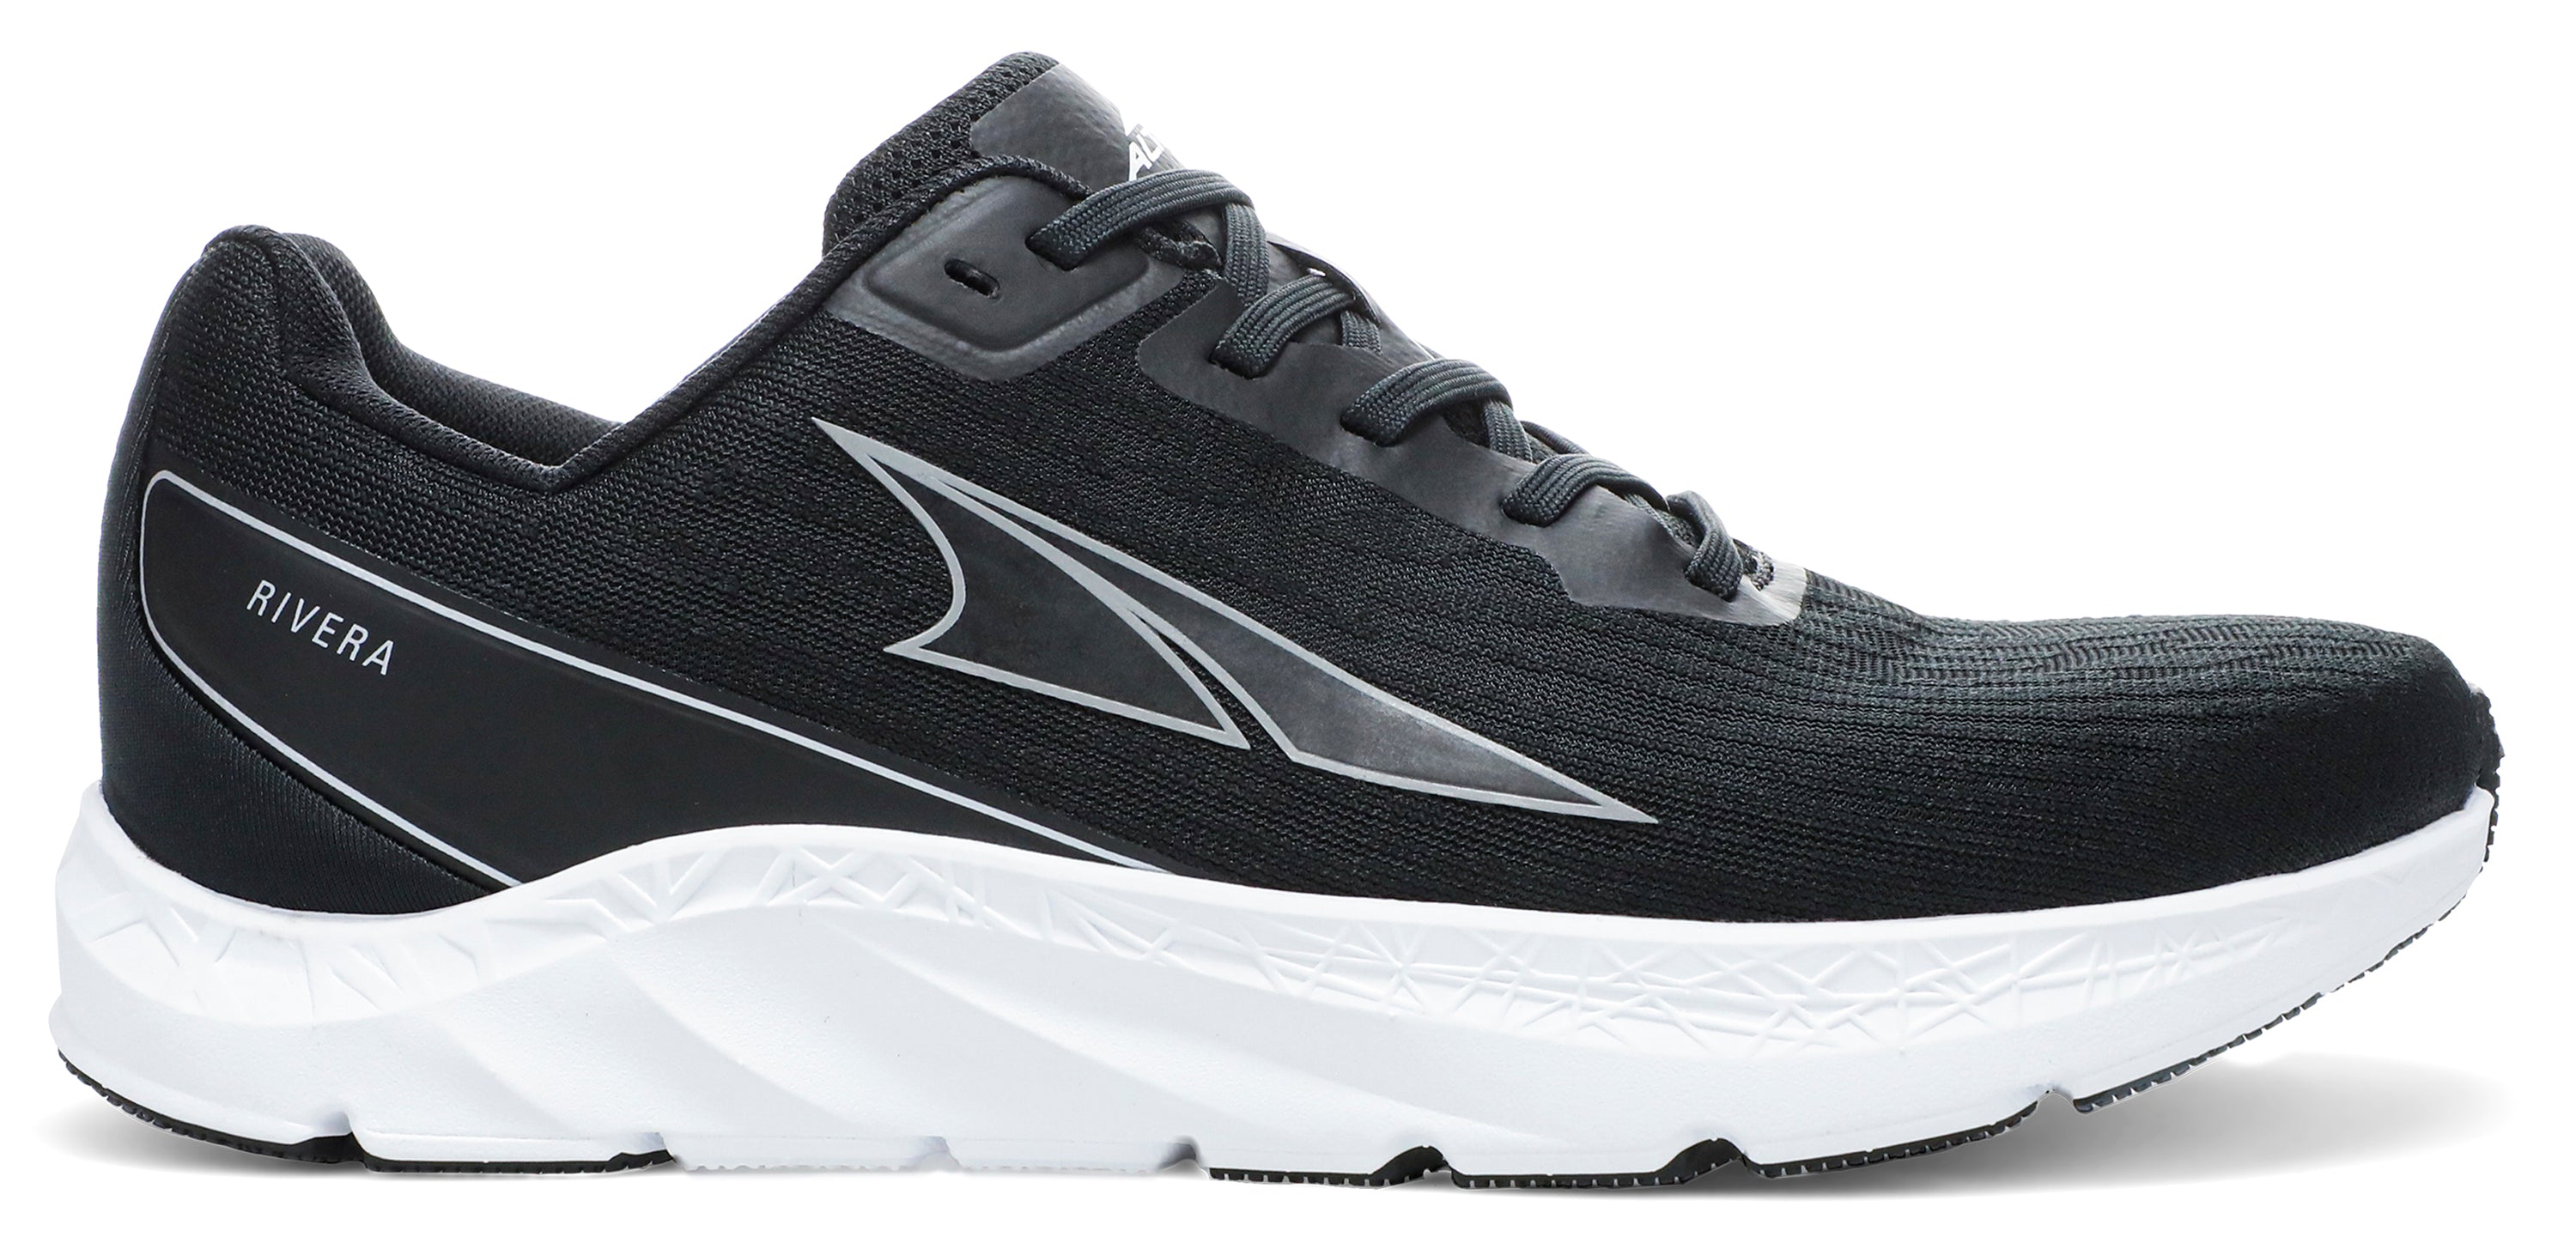 Altra Women's Rivera Road Running Shoe in Black/White from the side